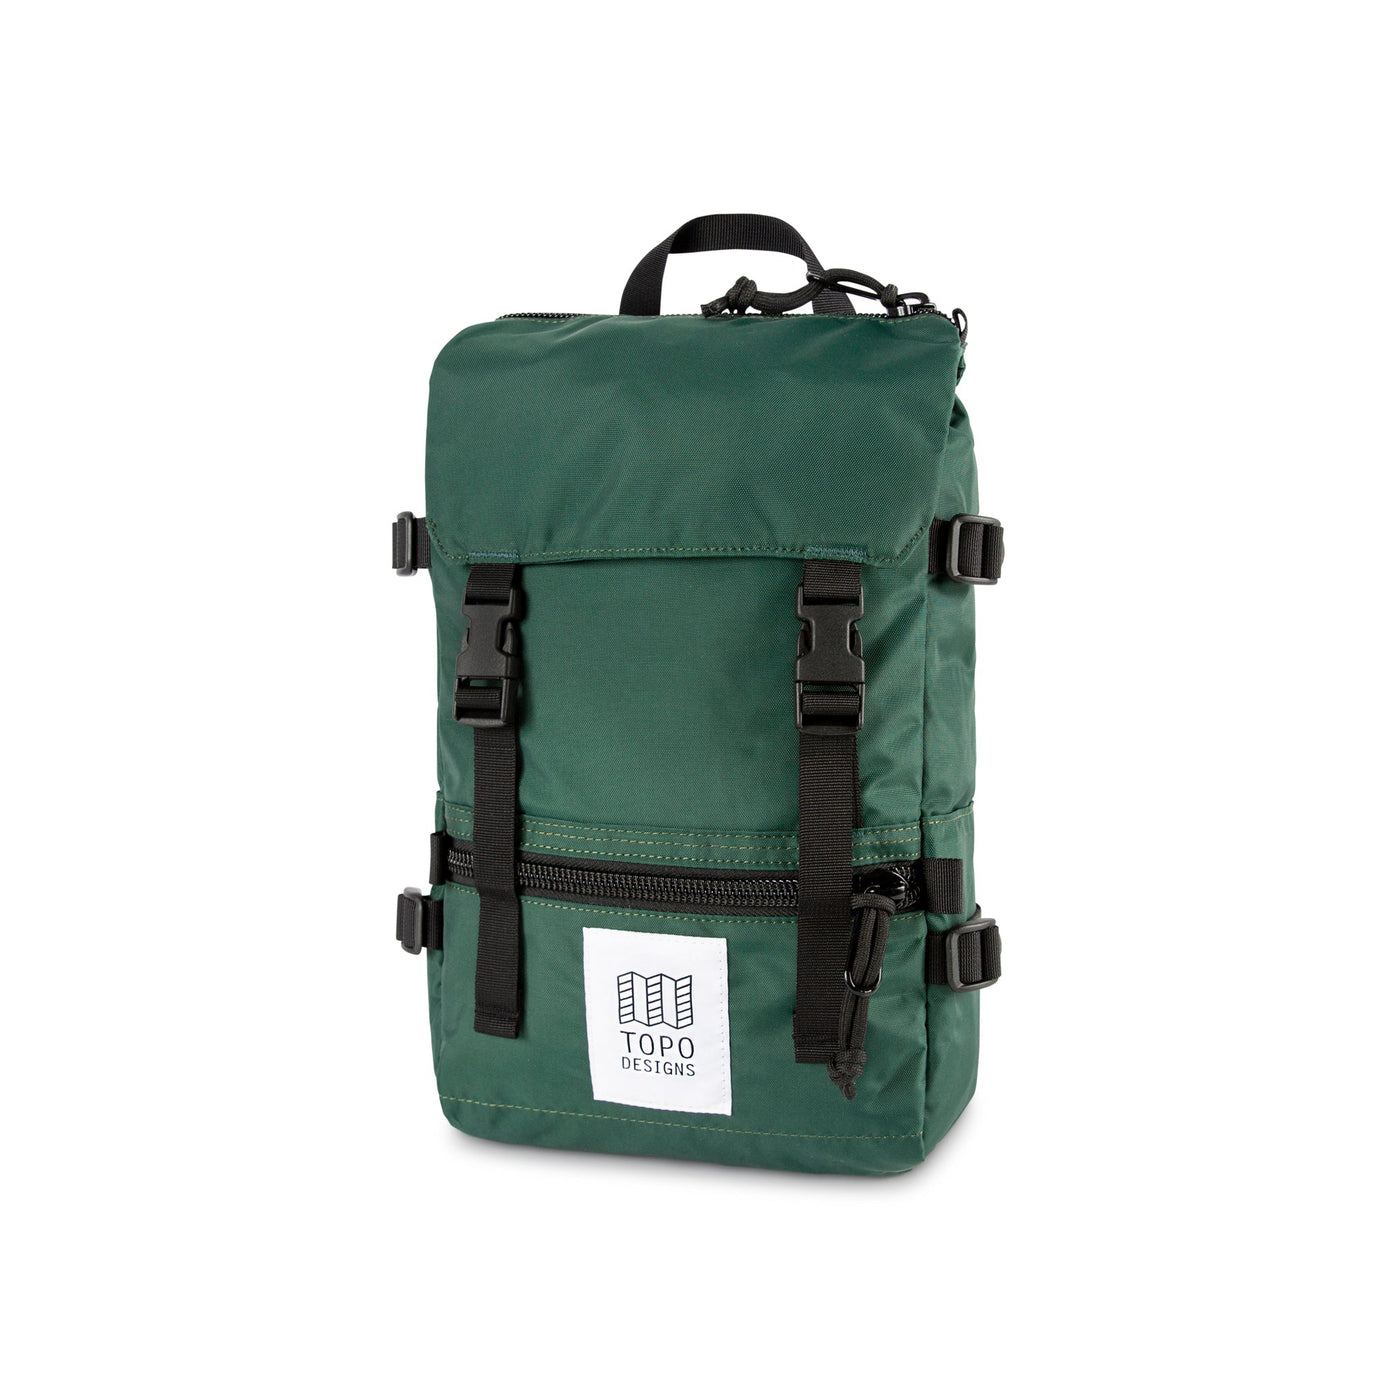 Topo Designs Rover Pack Mini backpack in "Forest" green.